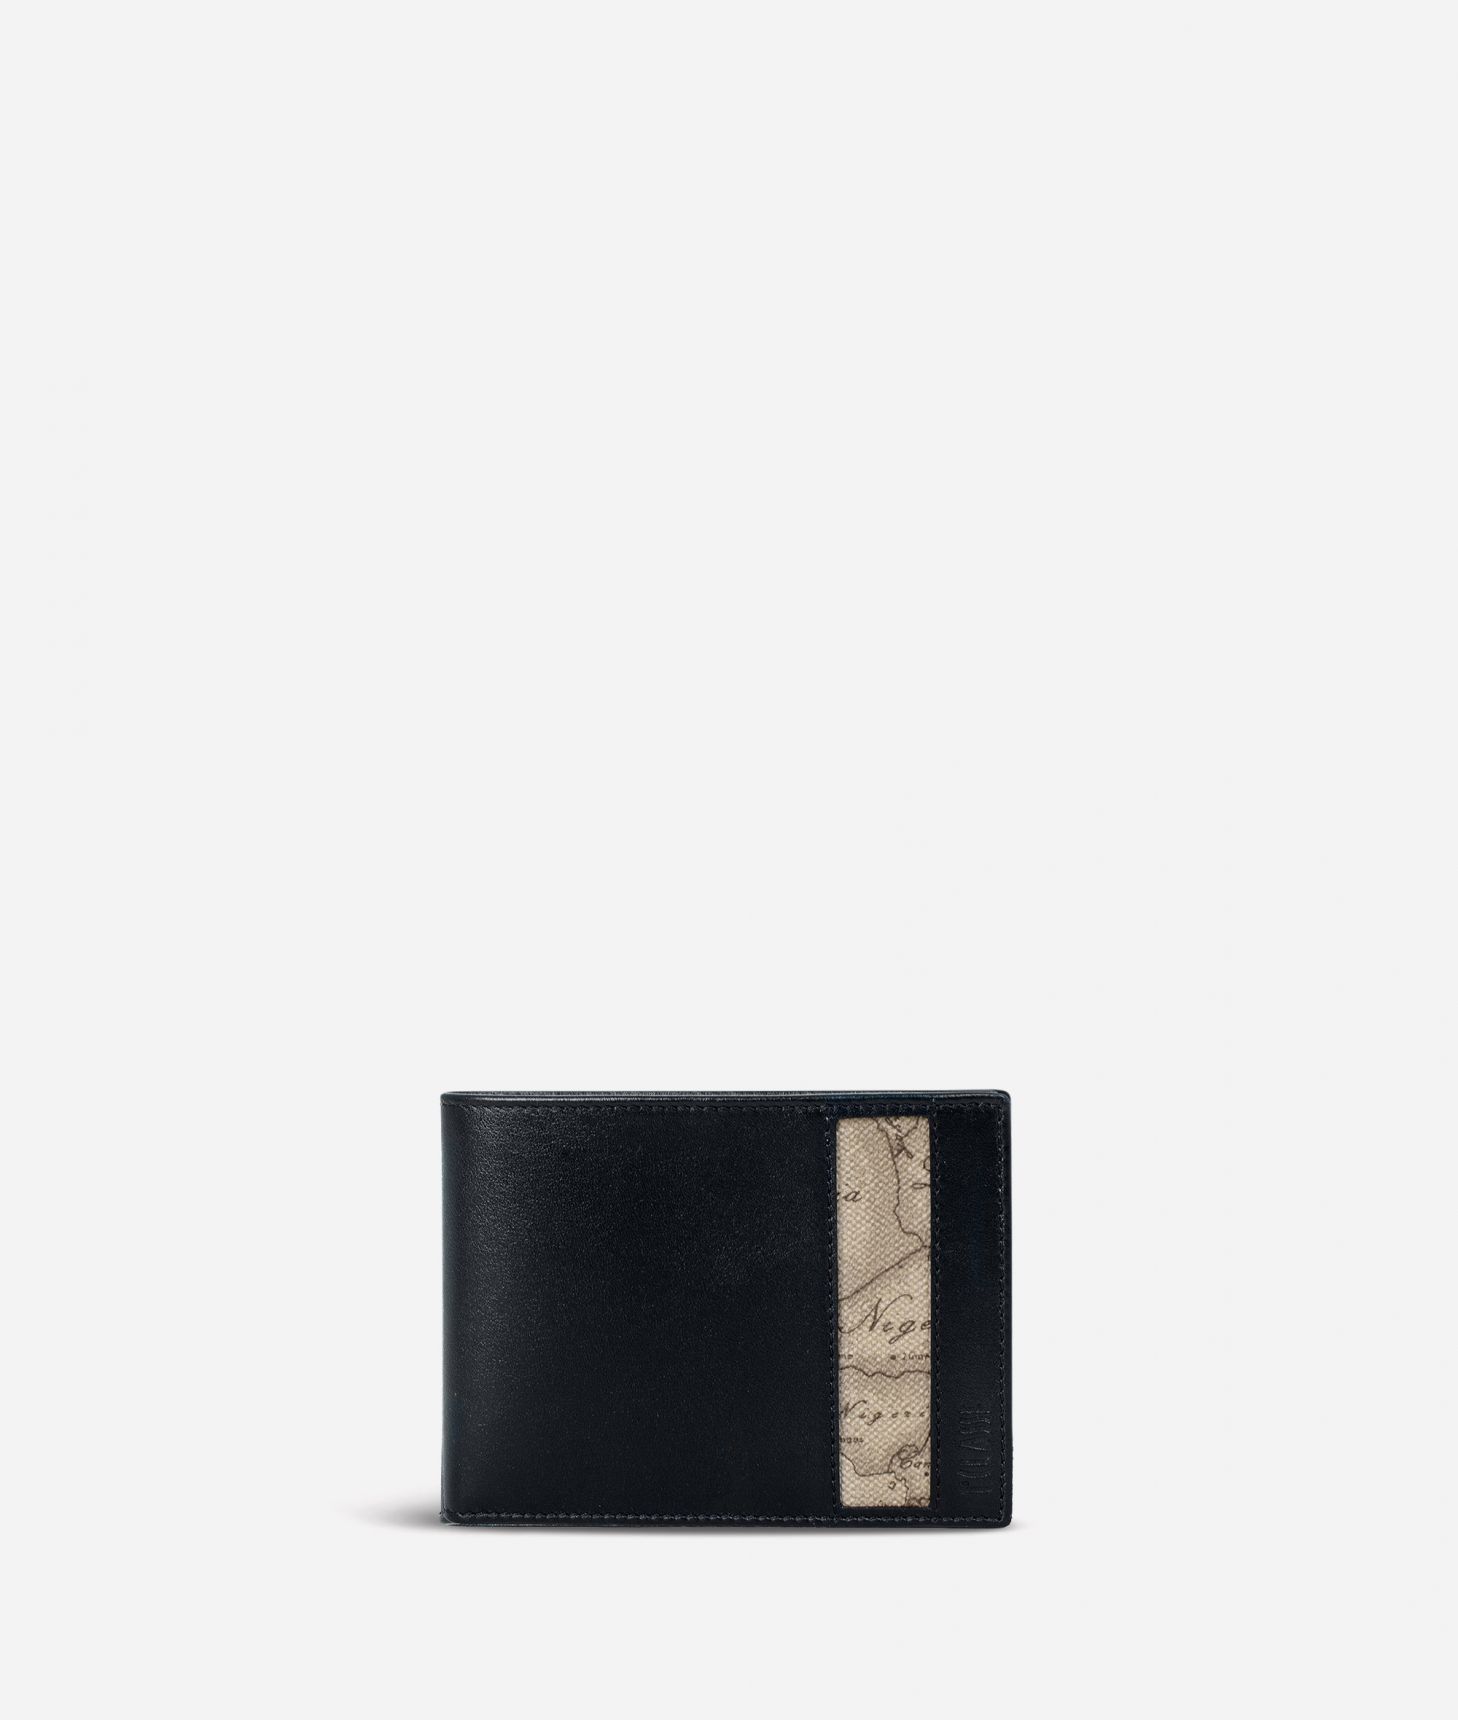 Small leather wallet Geo Tortora fabric trims,front